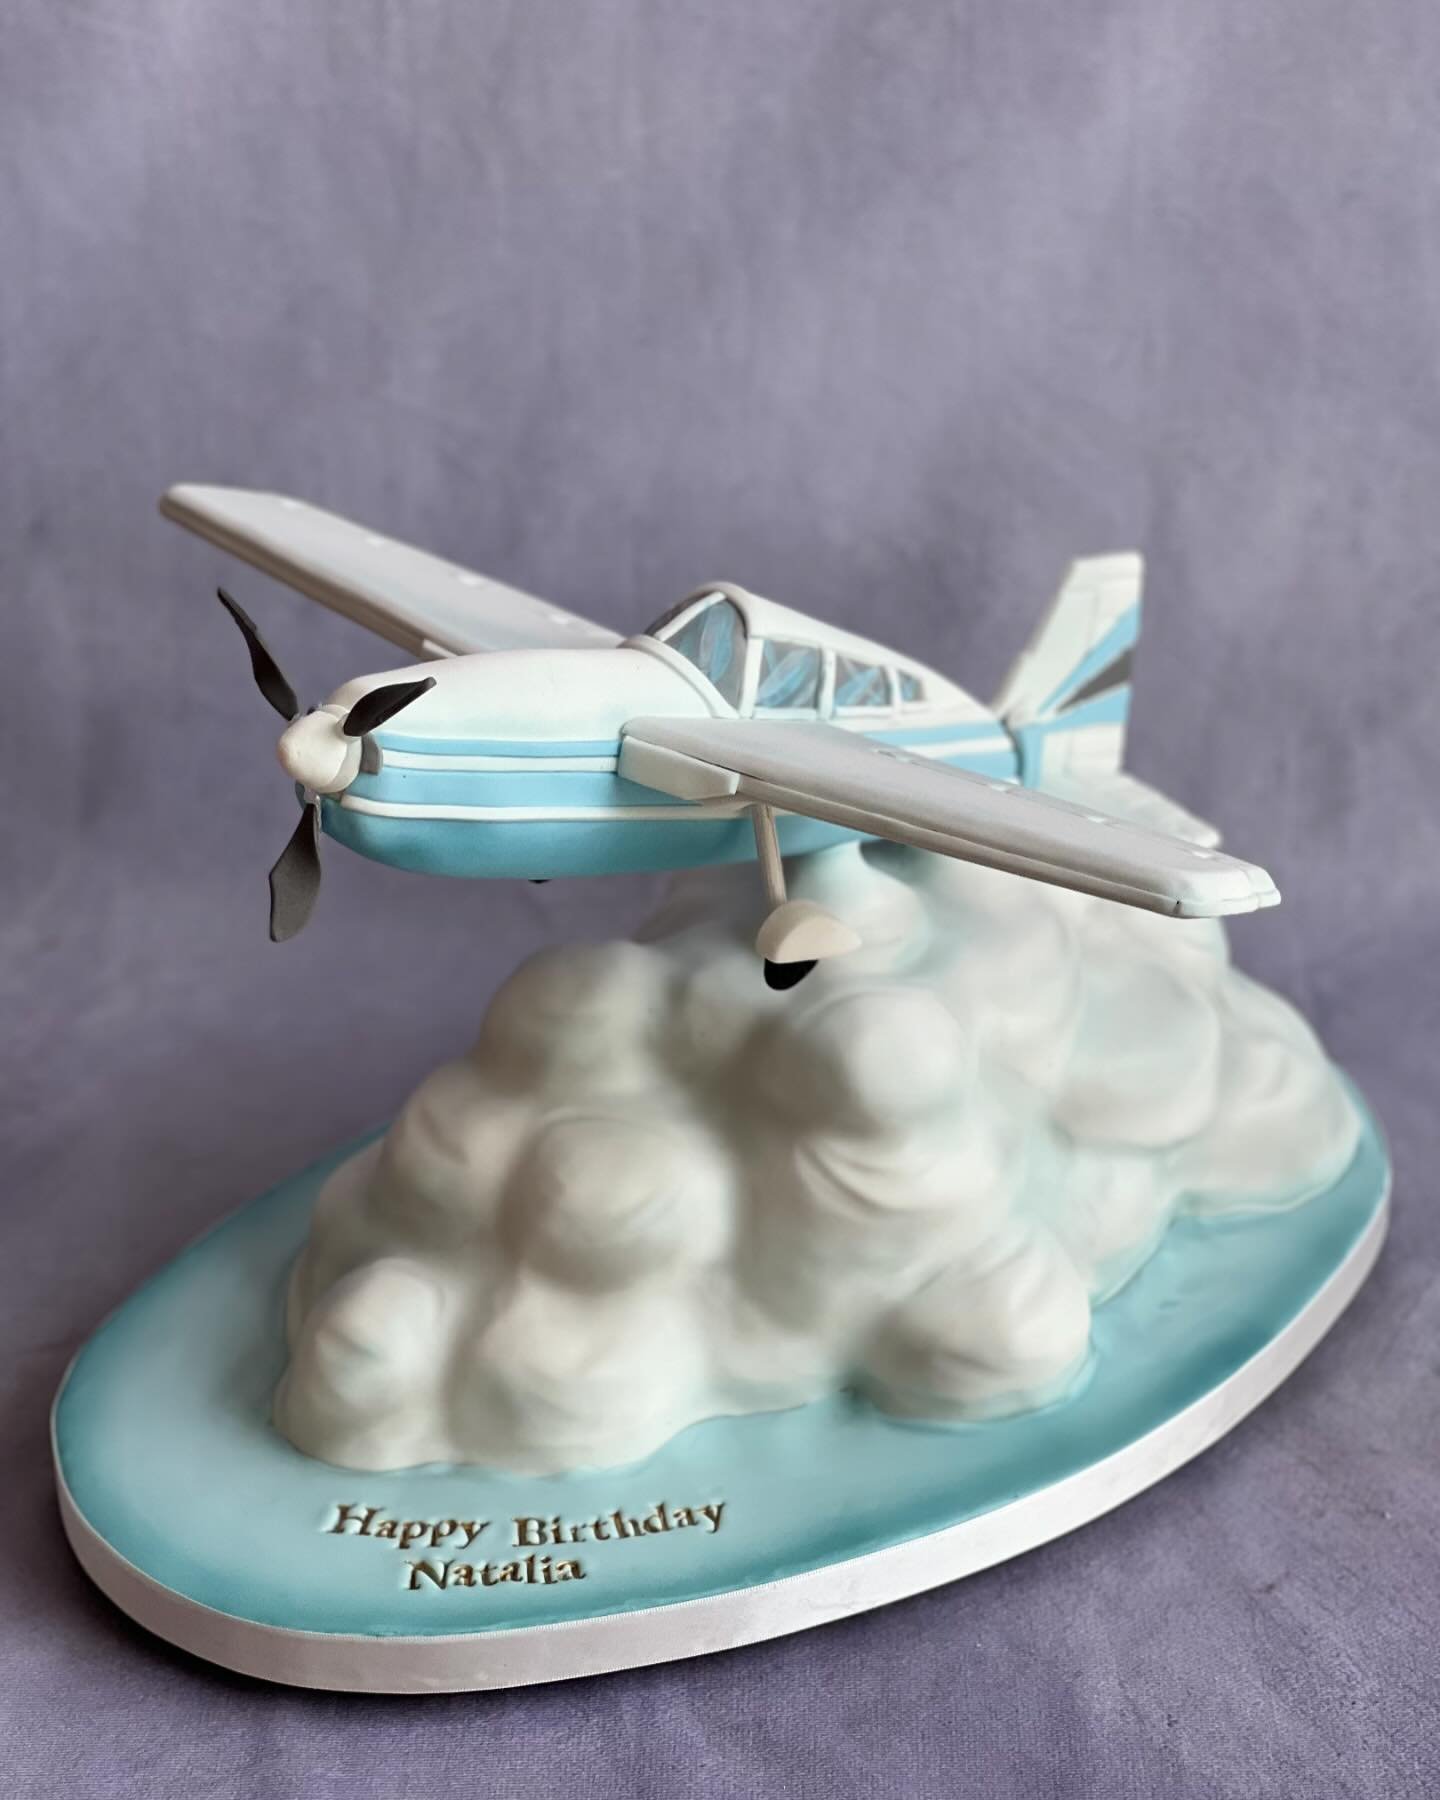 Propellor Plane Cake ✈️☁️

I wish I was getting on one of these and flying on holiday! 

.
#cake #cakeart #propellorplane #planecake #aeroplanecake #birthdaycake #luxurycake #luxury #luxuryevents #luxurylifestyle